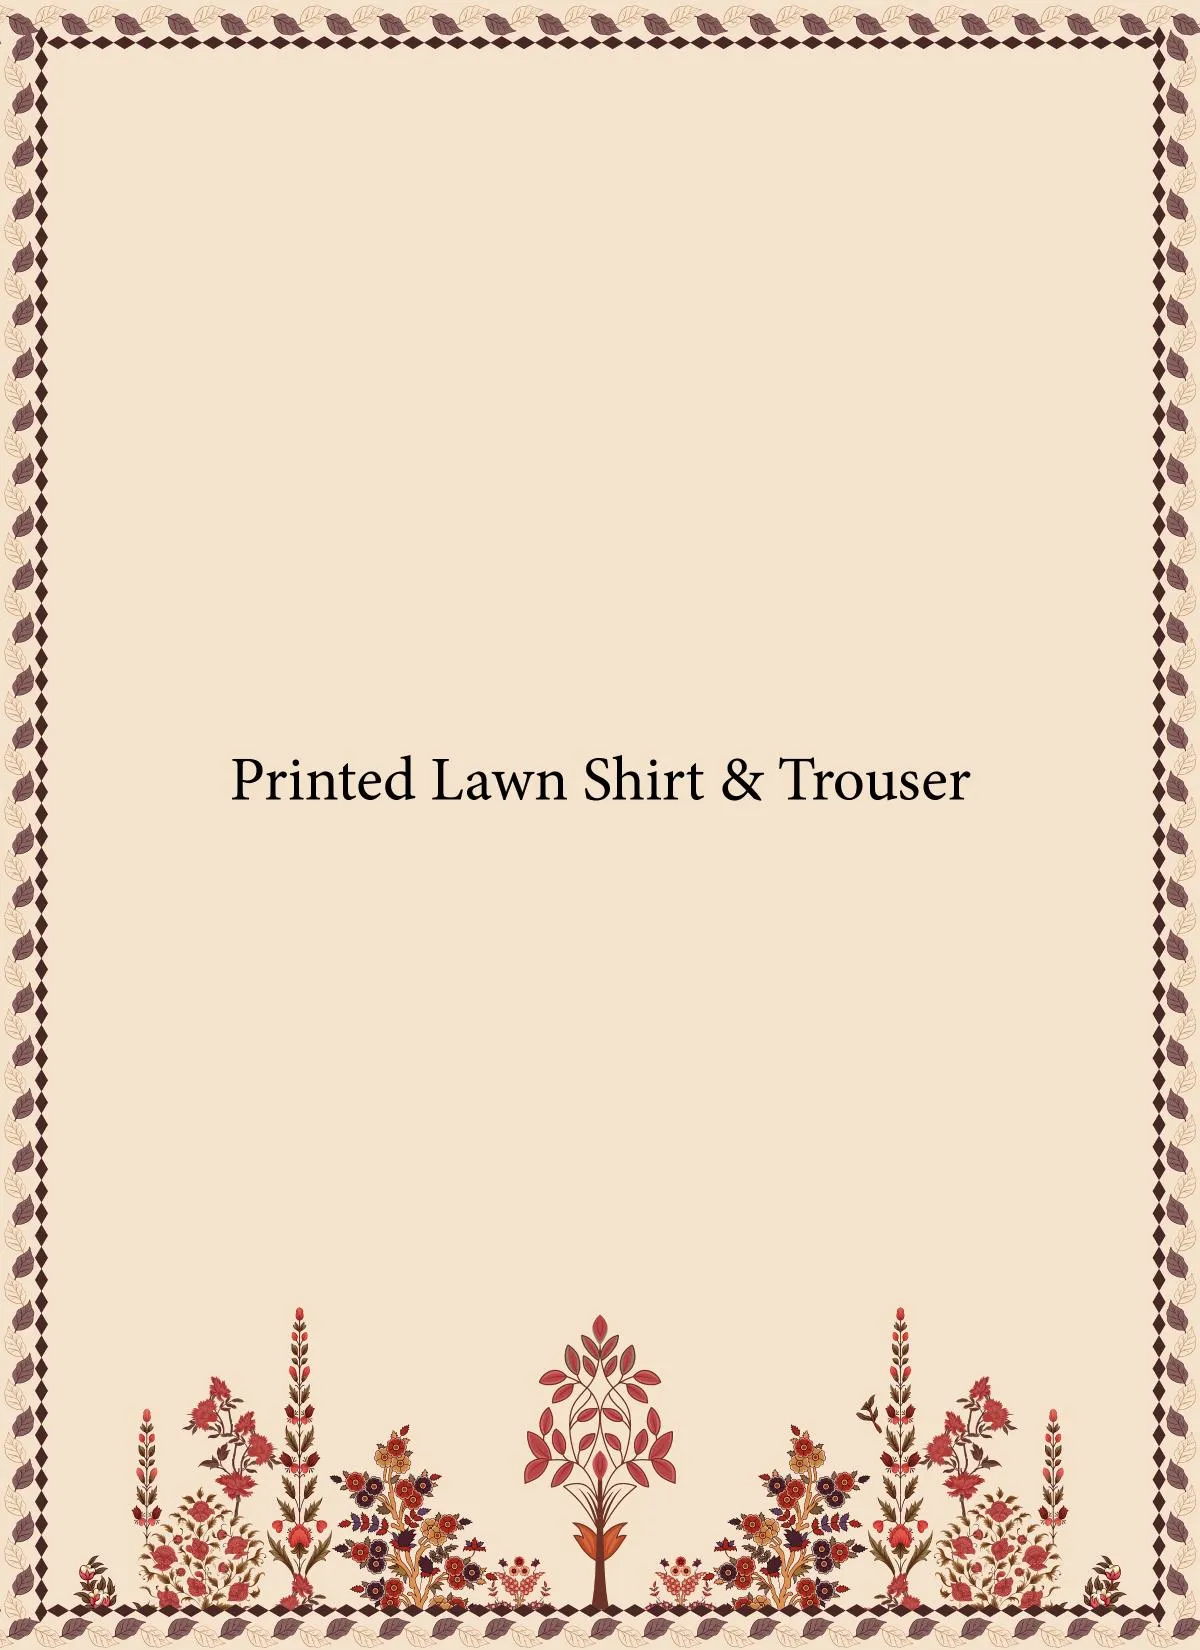 Printed lawn shirt and trouser